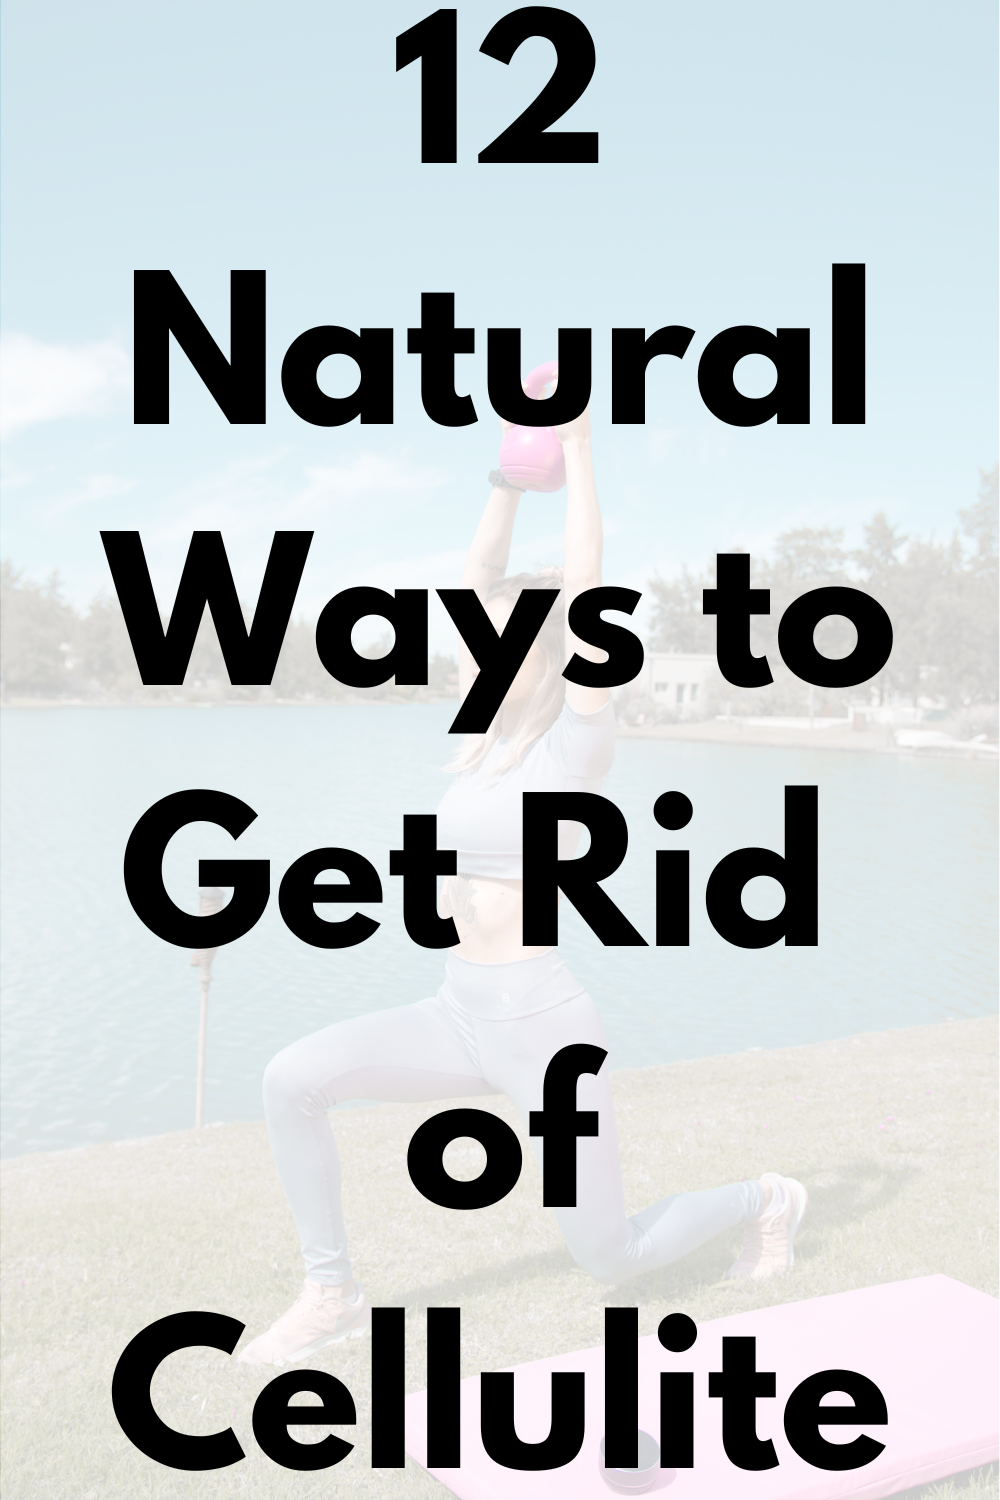 12 Natural Ways to Get Rid of Cellulite